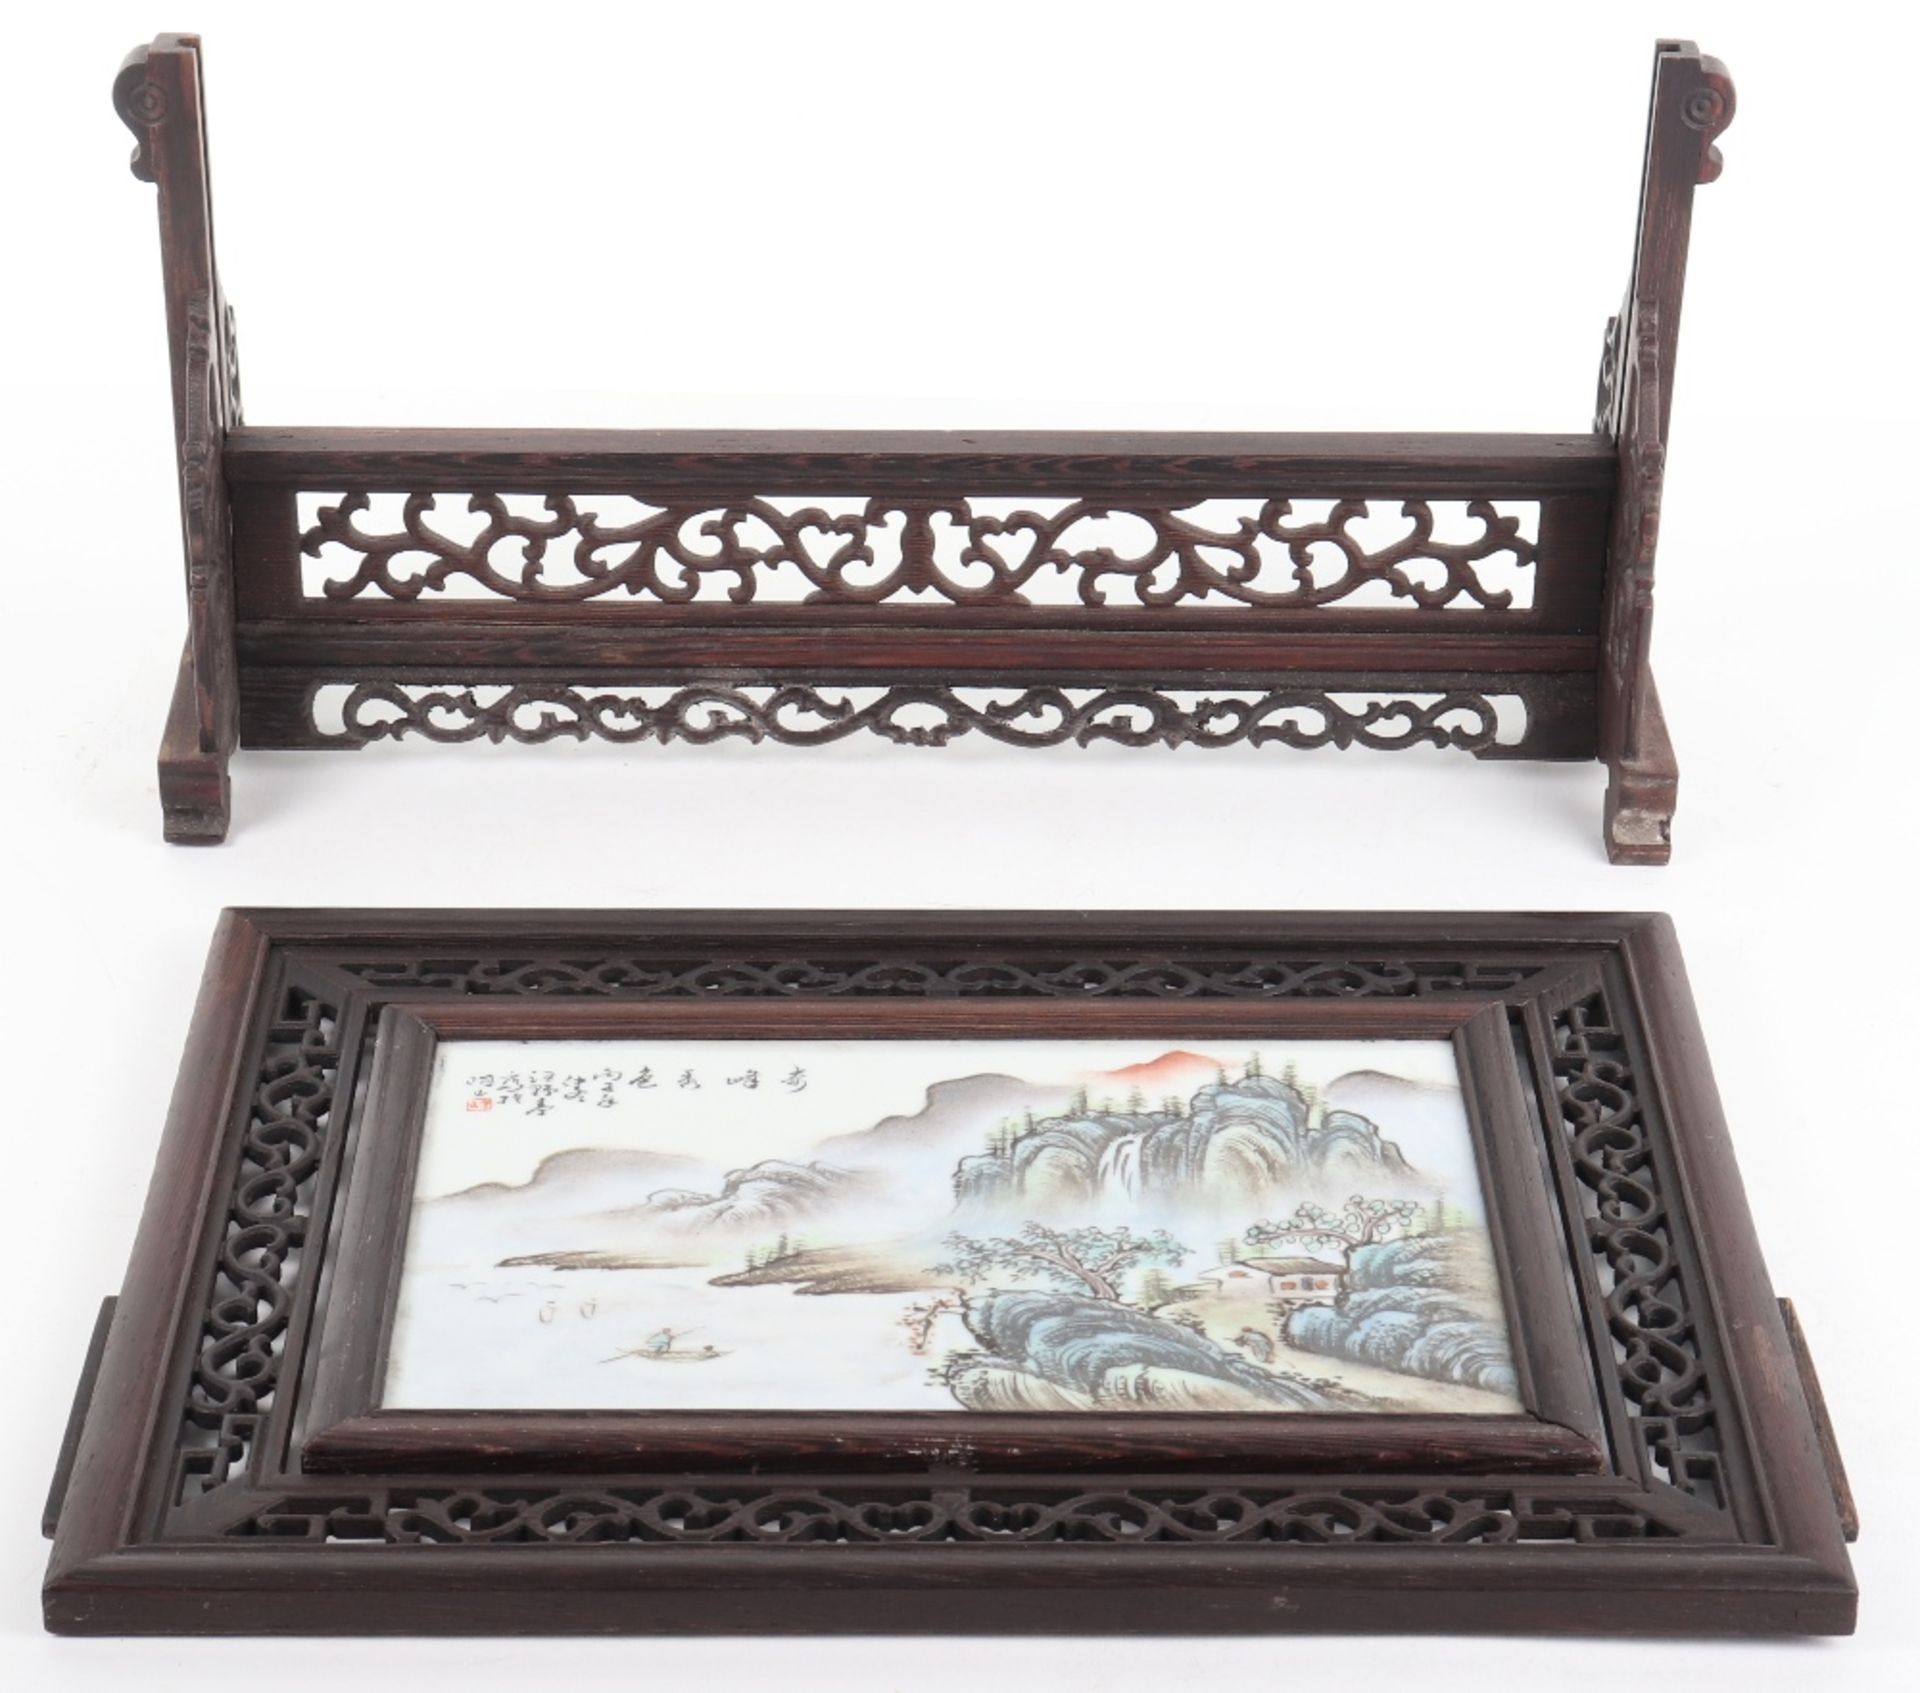 A late 19th/early 20th century Chinese porcelain handpainted table screen, on hardwood mount - Image 7 of 8